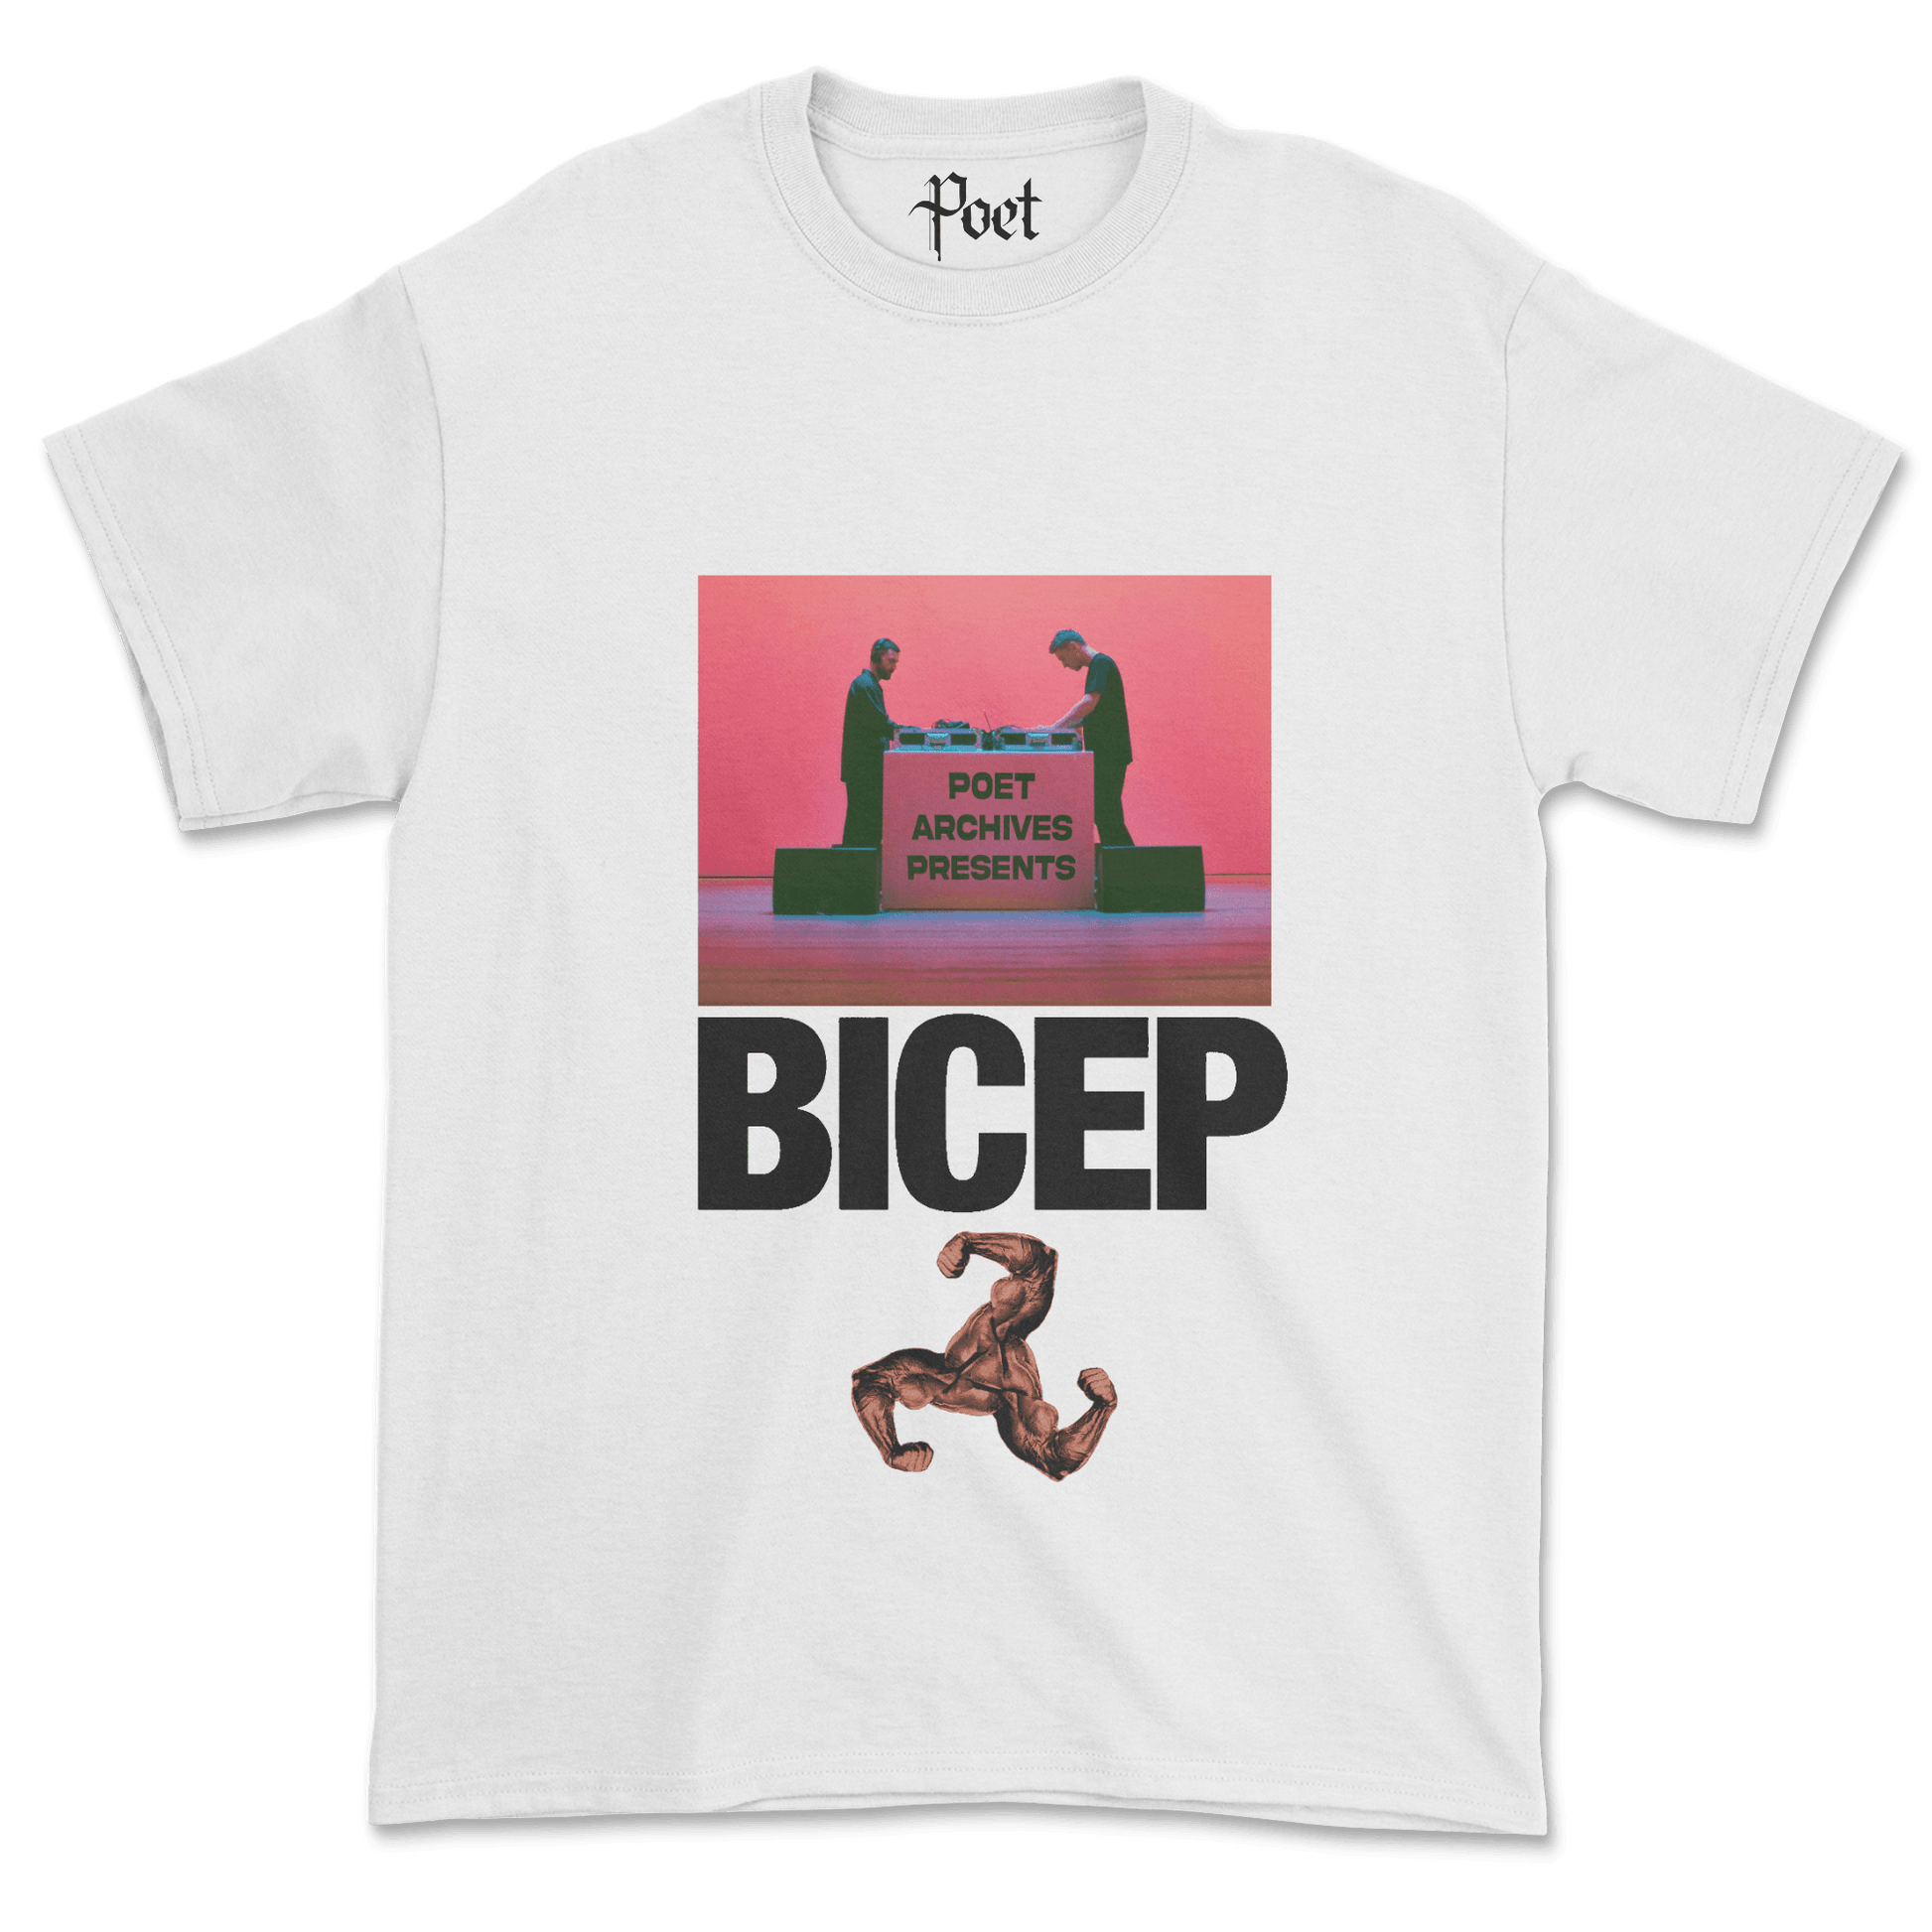 Bicep T-Shirt - Poet Archives